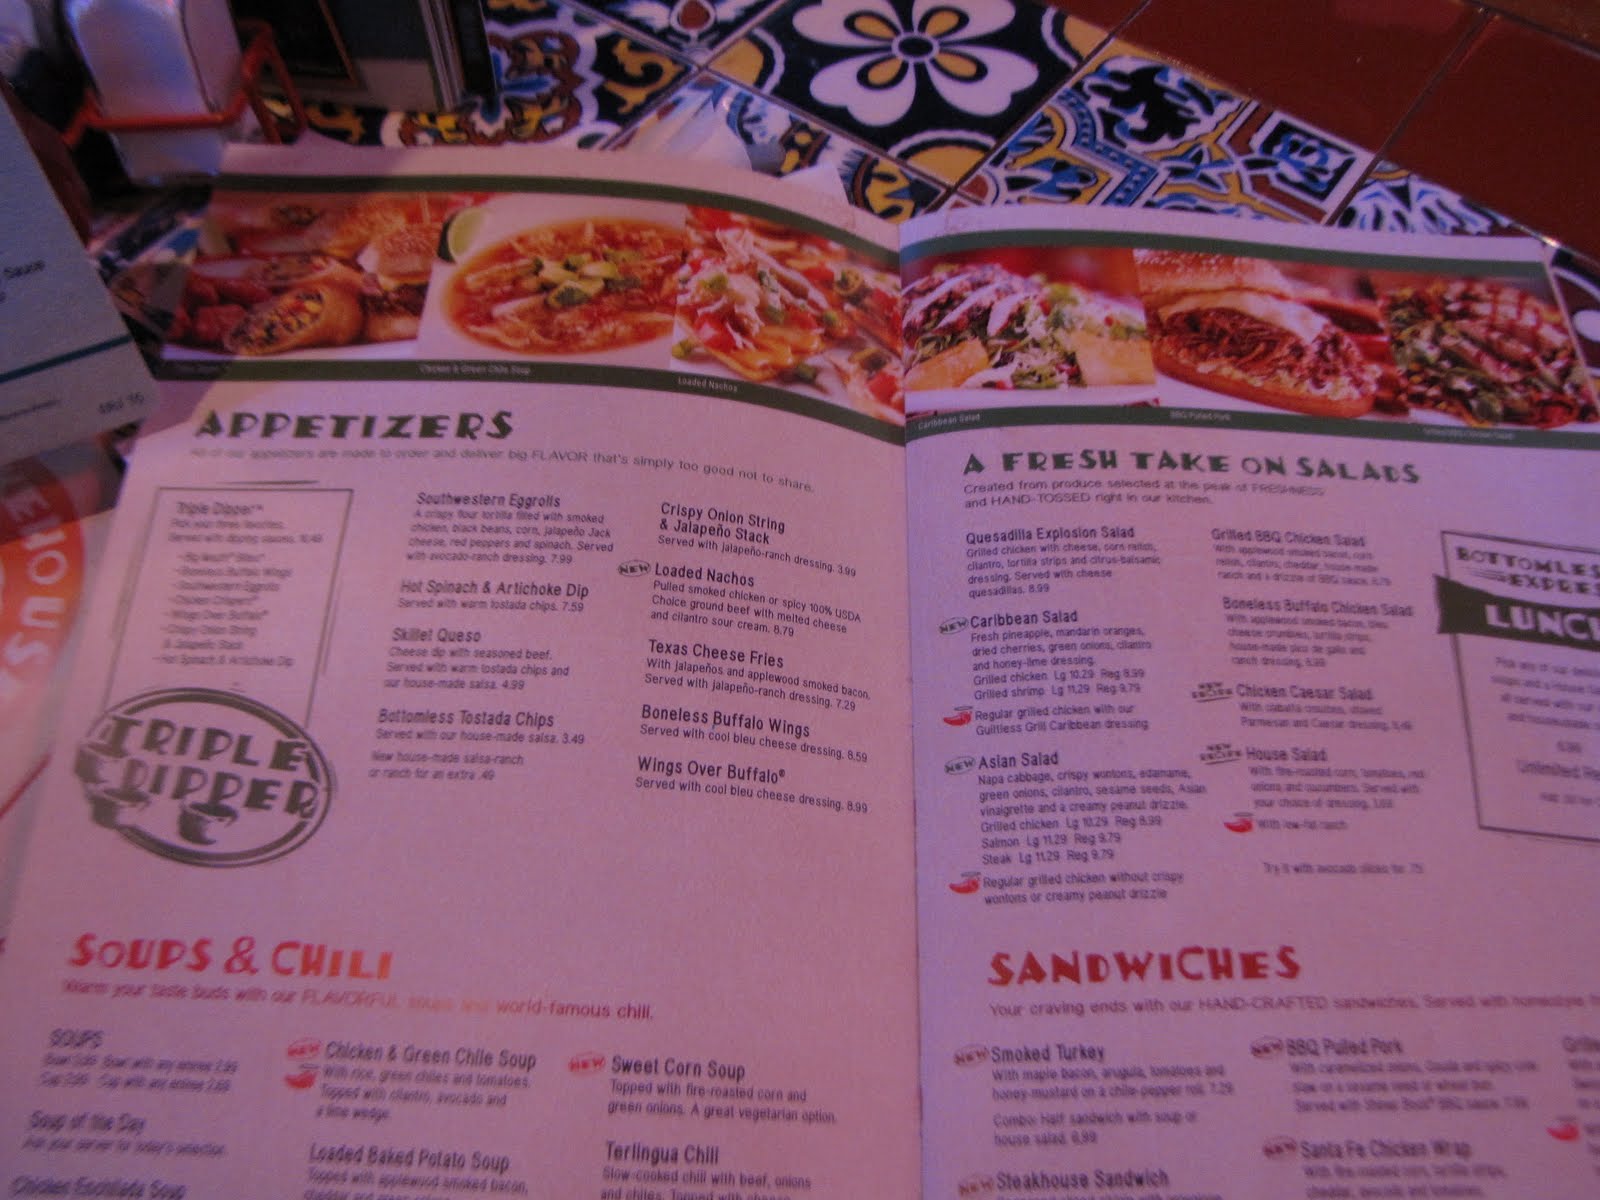 Chili’s Grill and Bar Resturant: A New Freshly Prepared Menu - The